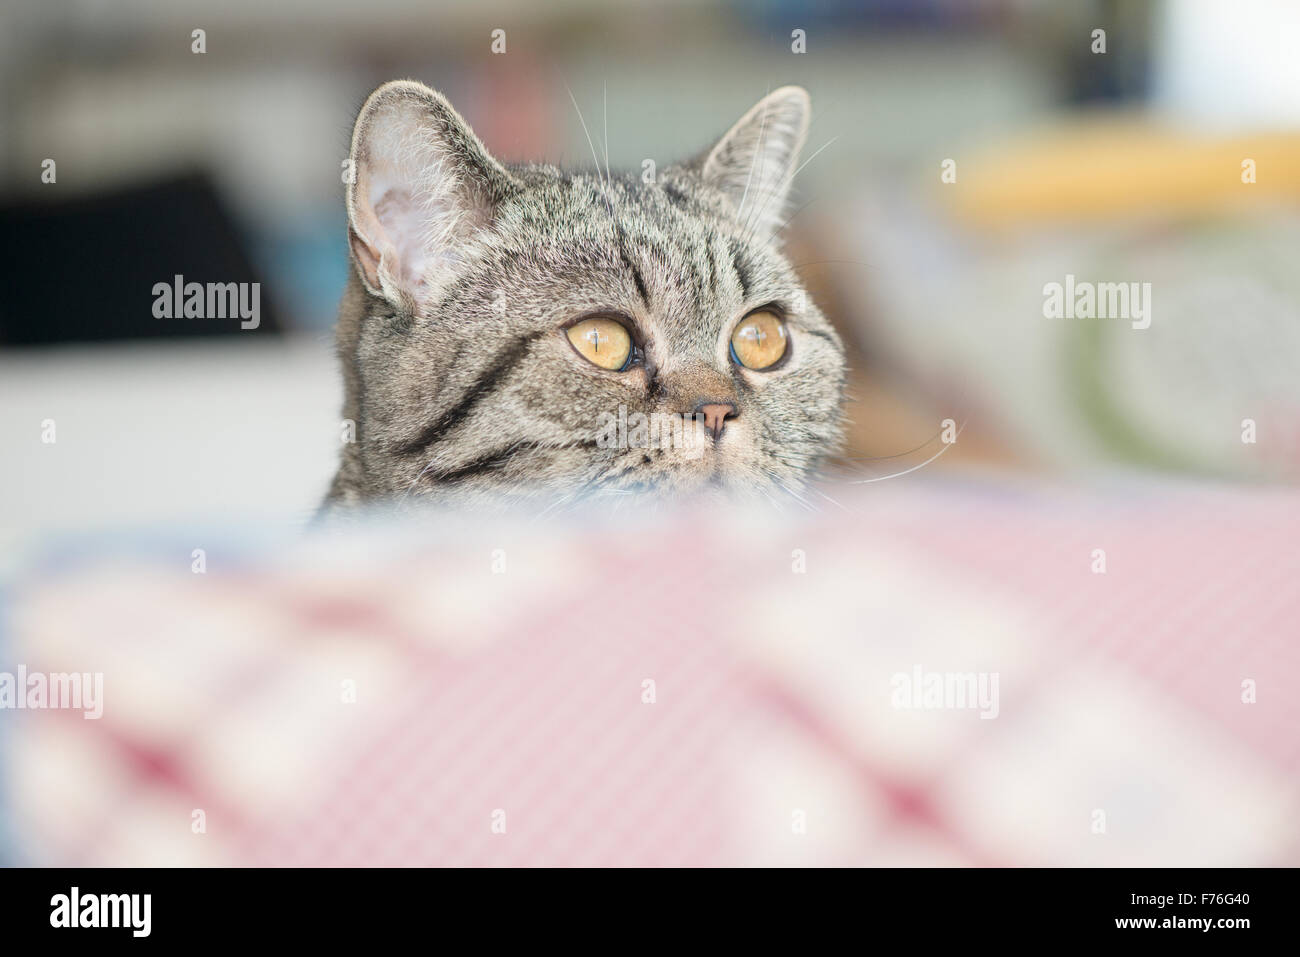 British shorthair cat at home looking away with curiosity. Stock Photo